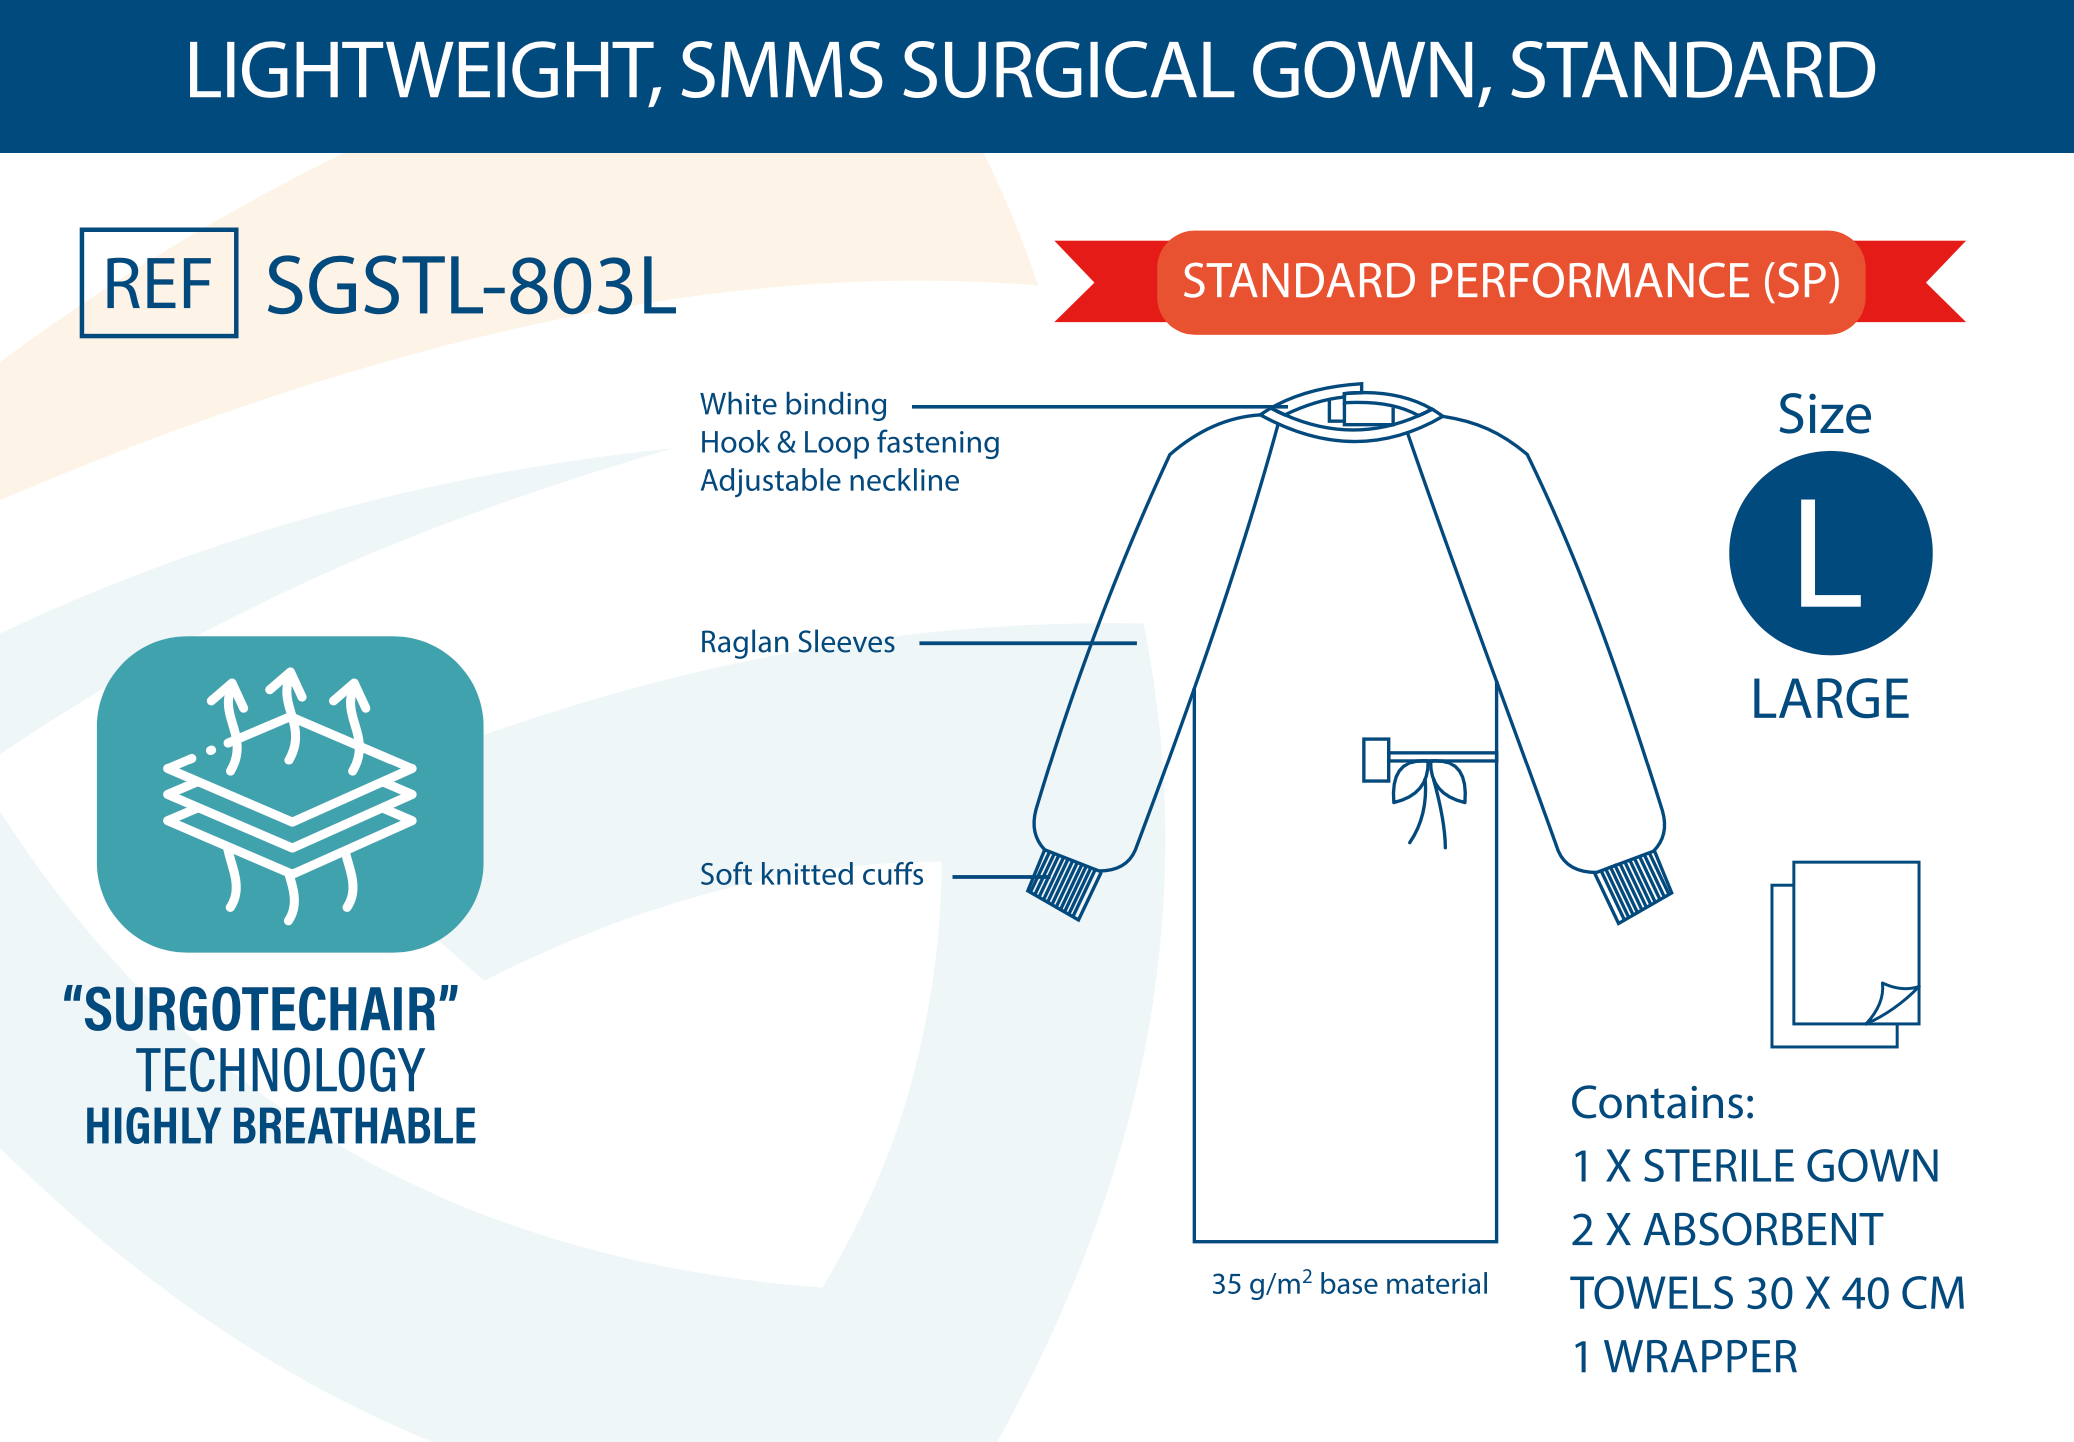 Sterile Standard Surgical Gown Lightweight SMMS 35 Gsm Double Wrapped with 2 x hand towels 30 X 40cm hook-and-loop Fastening Adjustable Neckline Velcro, white Binding Soft Knitted Cuffs Antistatic Size Large L EN13795 Disposable